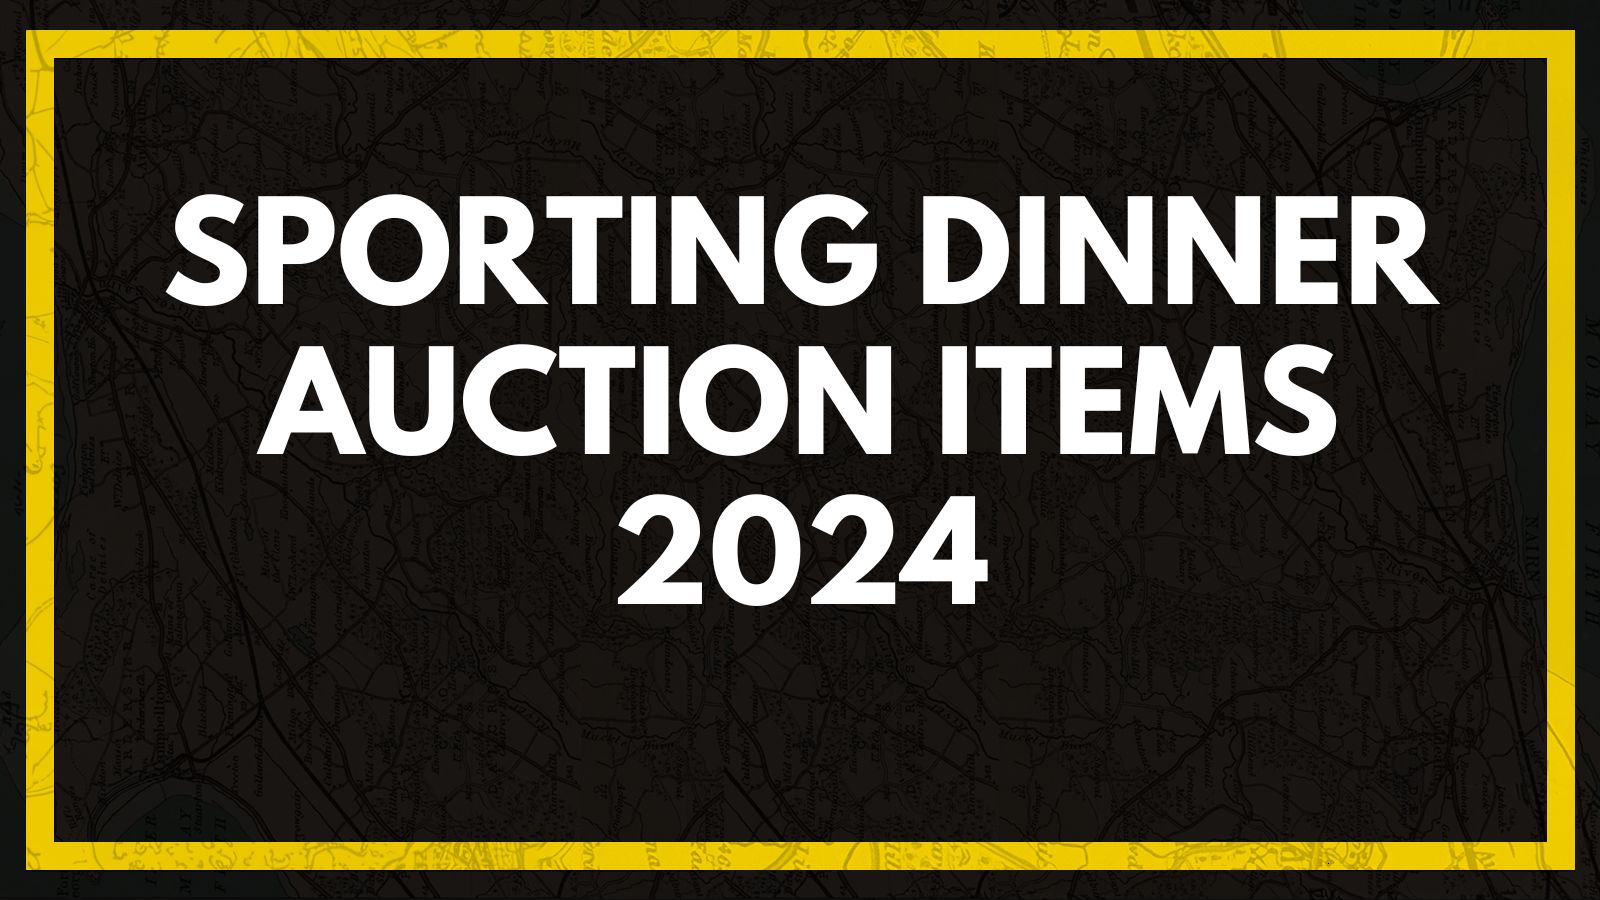 SPORTING DINNER AUCTION ITEMS 2024